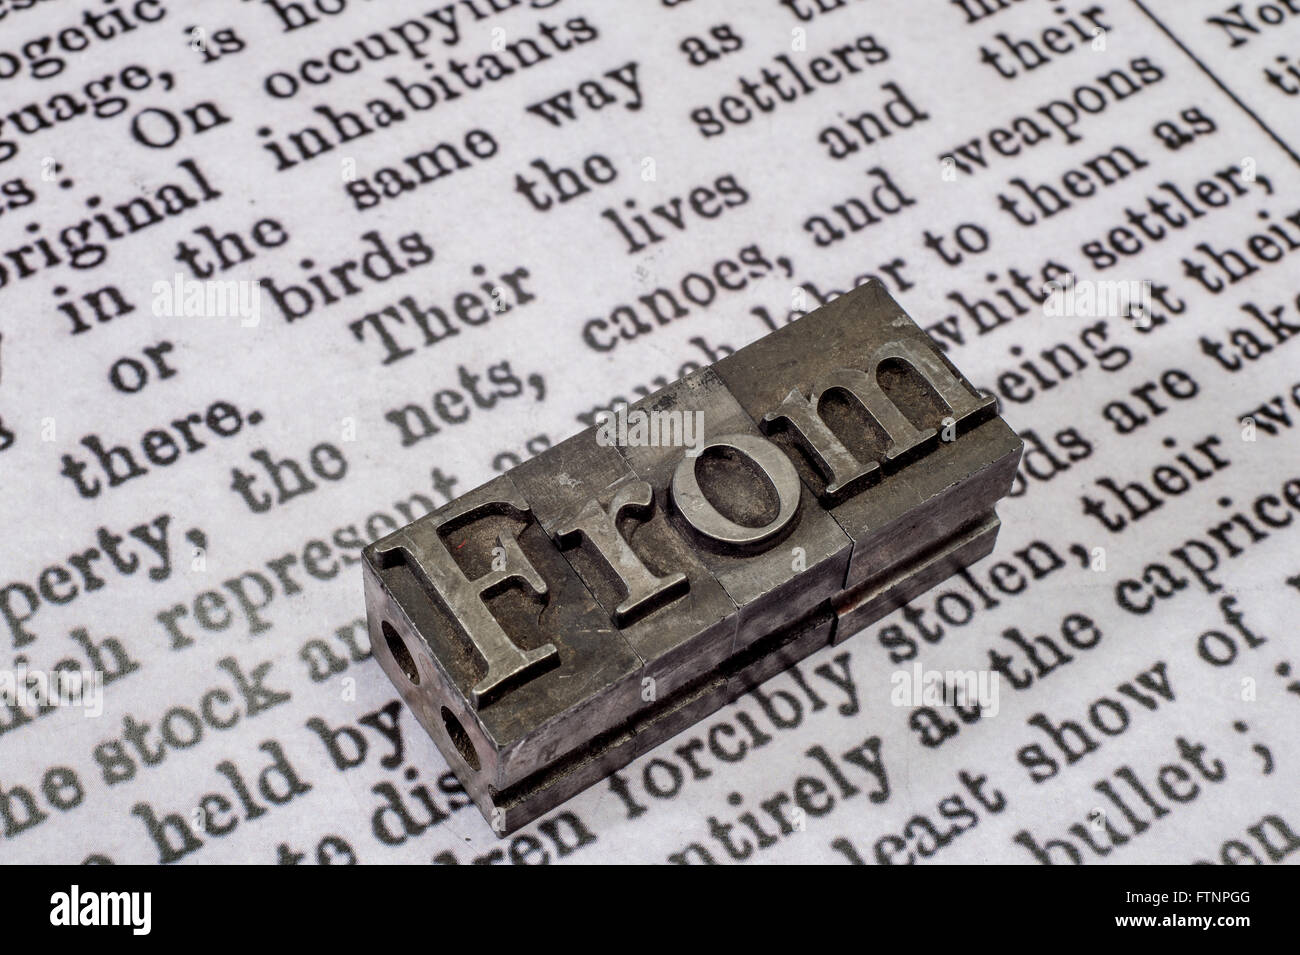 Press or newspaper style blocking letters arranged to display the word From. Stock Photo